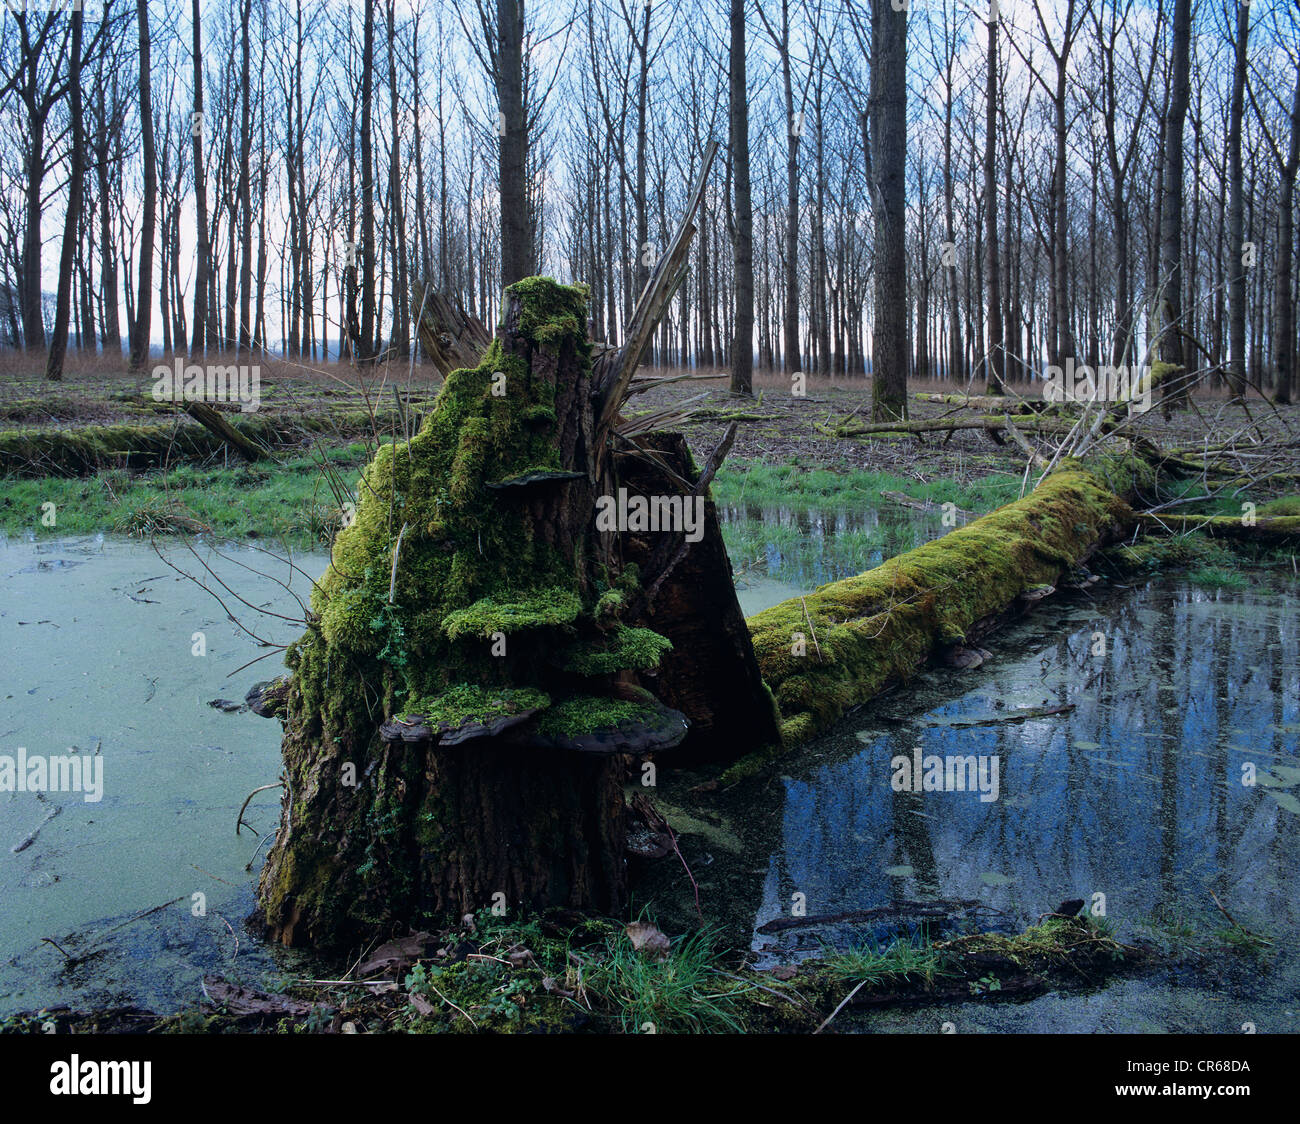 Lying dead wood in a wetland, Duckweed (Lemna) in the water, Bracket Fungi (Fomitopsis) around the root area Stock Photo